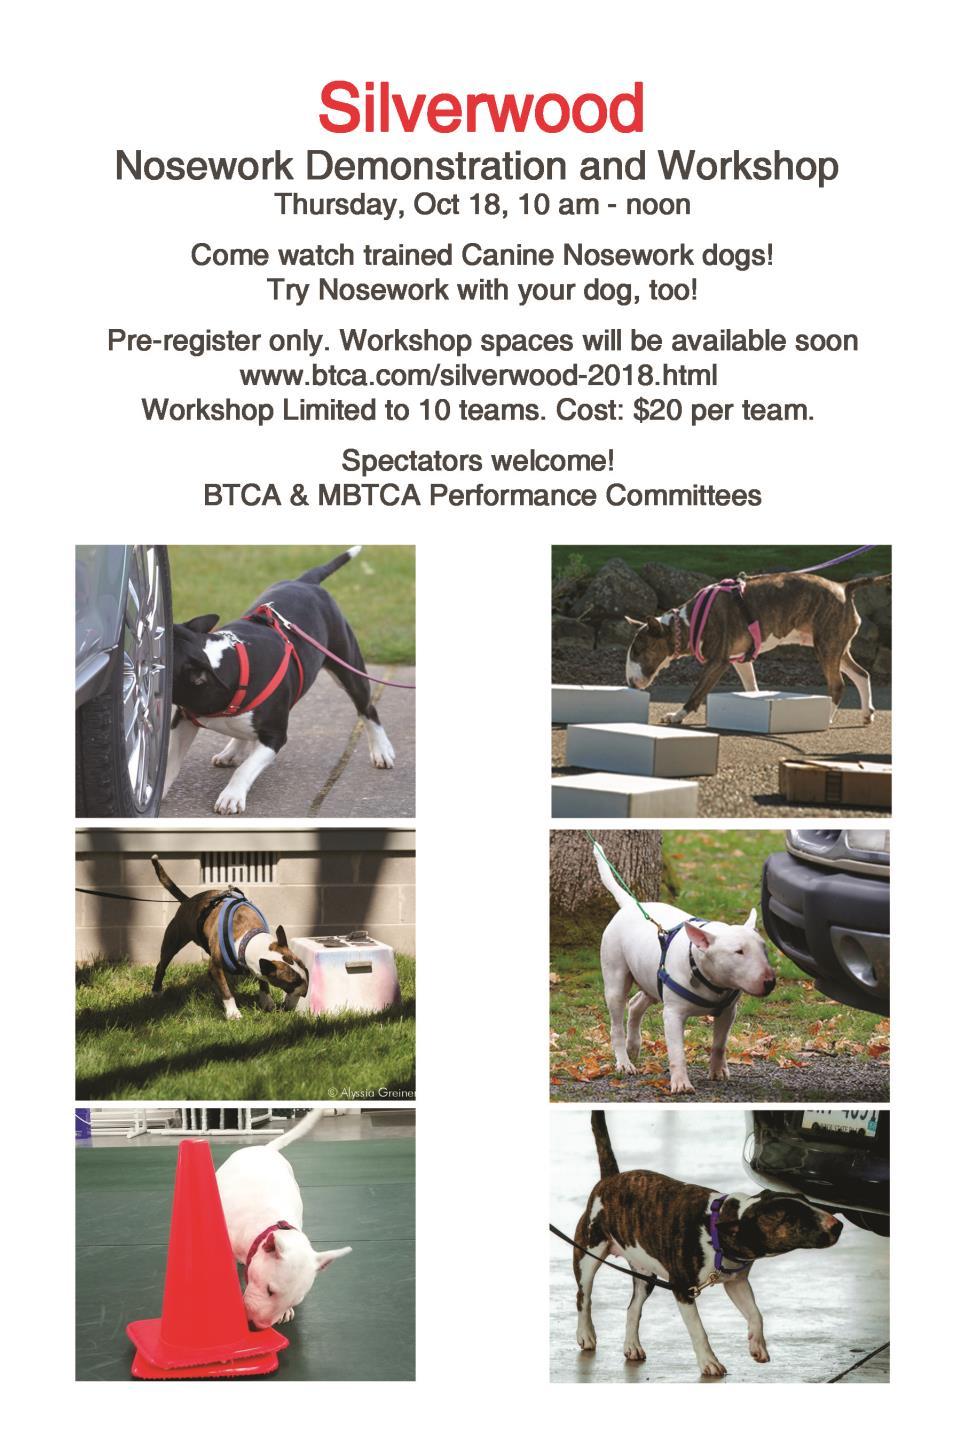 Performance Events (Thursday, October 18, 2018) 8:30 AM - Noon Canine Good Citizen / Good Citizen Advanced Tricks Title testing Start practicing now so you can get CGC and Tricks titles on your dog!